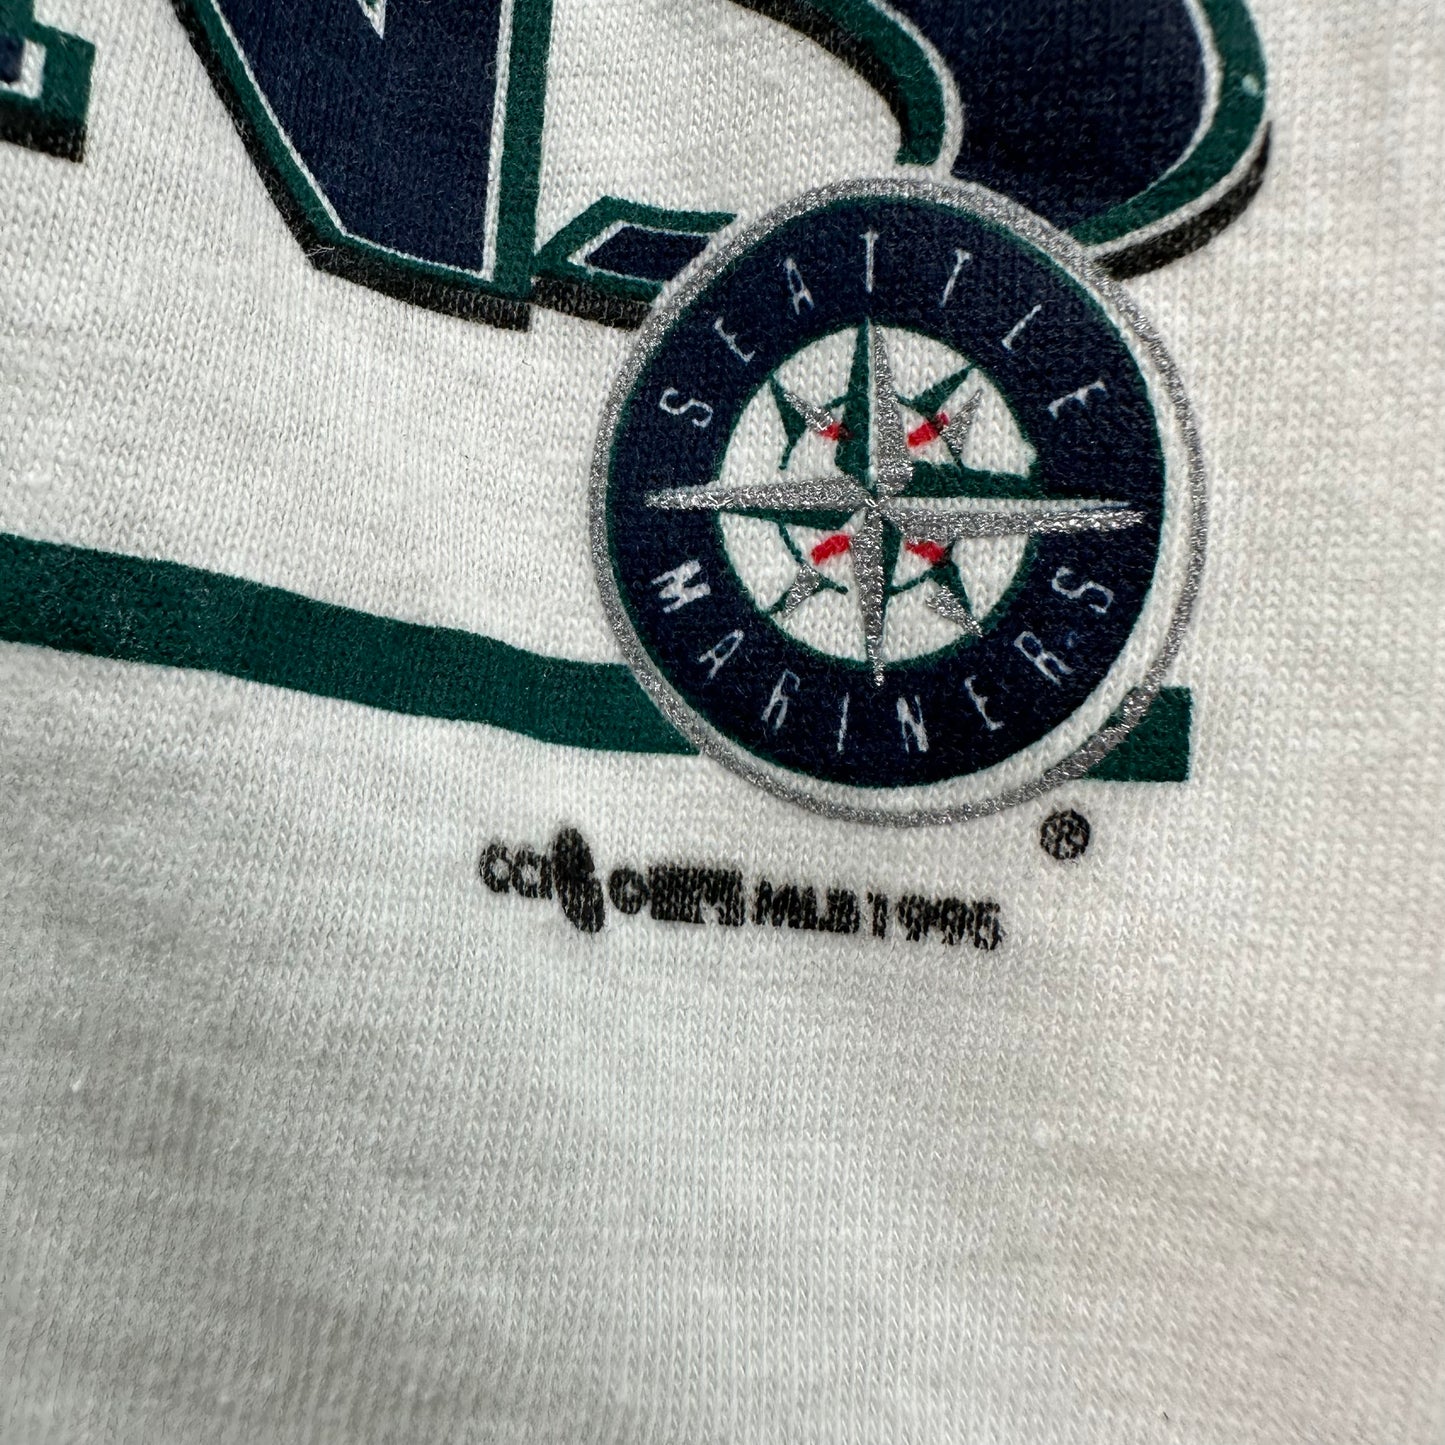 1995 Mariners Western Division Champs Shirt - L